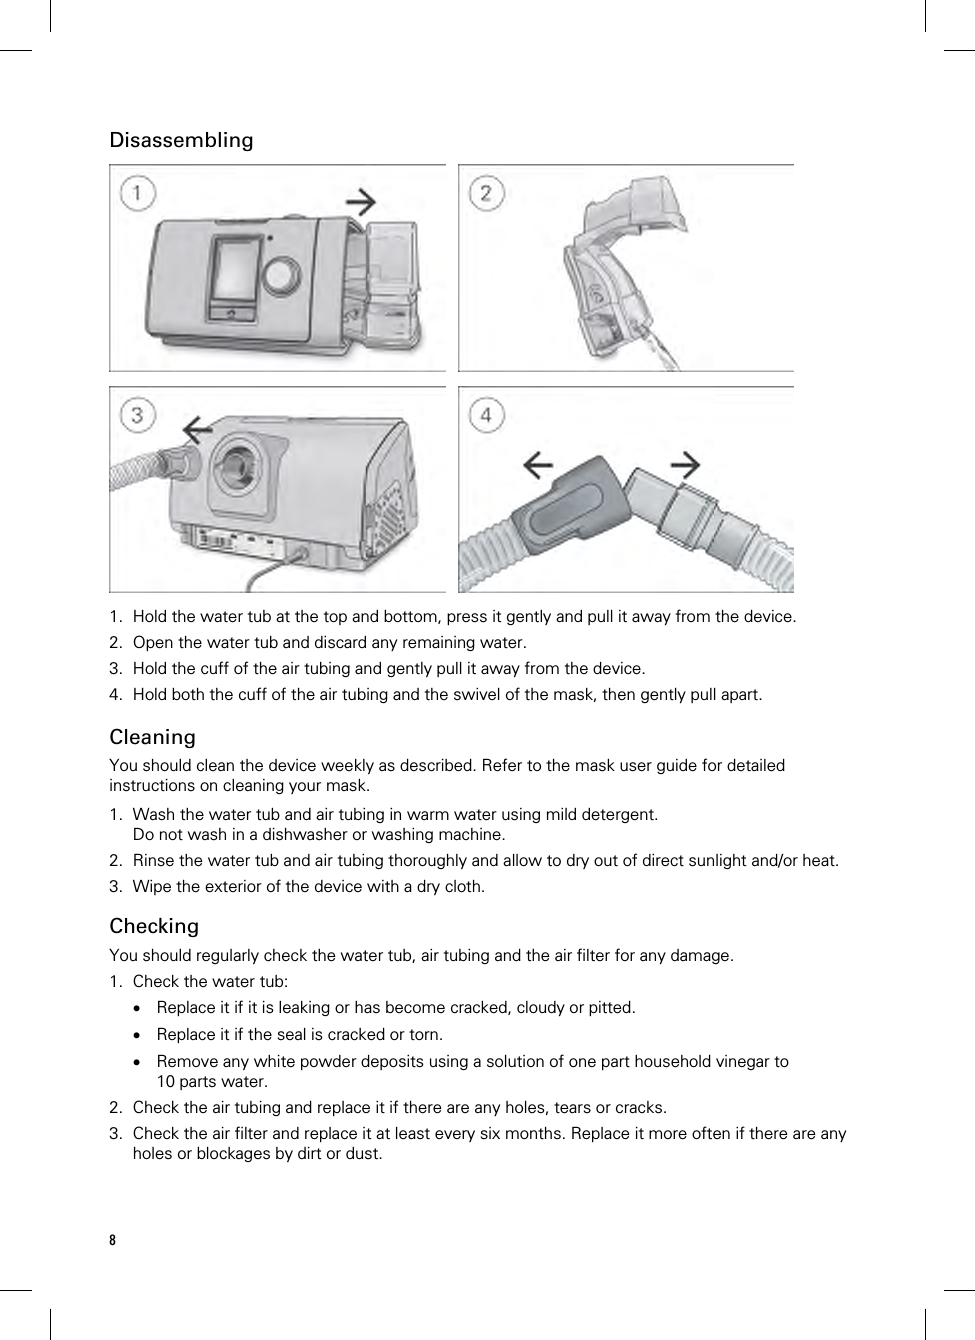 8  Disassembling     1. Hold the water tub at the top and bottom, press it gently and pull it away from the device. 2. Open the water tub and discard any remaining water. 3. Hold the cuff of the air tubing and gently pull it away from the device. 4. Hold both the cuff of the air tubing and the swivel of the mask, then gently pull apart.   Cleaning You should clean the device weekly as described. Refer to the mask user guide for detailed instructions on cleaning your mask.  1. Wash the water tub and air tubing in warm water using mild detergent. Do not wash in a dishwasher or washing machine. 2. Rinse the water tub and air tubing thoroughly and allow to dry out of direct sunlight and/or heat. 3. Wipe the exterior of the device with a dry cloth.  Checking You should regularly check the water tub, air tubing and the air filter for any damage. 1. Check the water tub:  Replace it if it is leaking or has become cracked, cloudy or pitted.  Replace it if the seal is cracked or torn.  Remove any white powder deposits using a solution of one part household vinegar to 10 parts water. 2. Check the air tubing and replace it if there are any holes, tears or cracks. 3. Check the air filter and replace it at least every six months. Replace it more often if there are any holes or blockages by dirt or dust.  